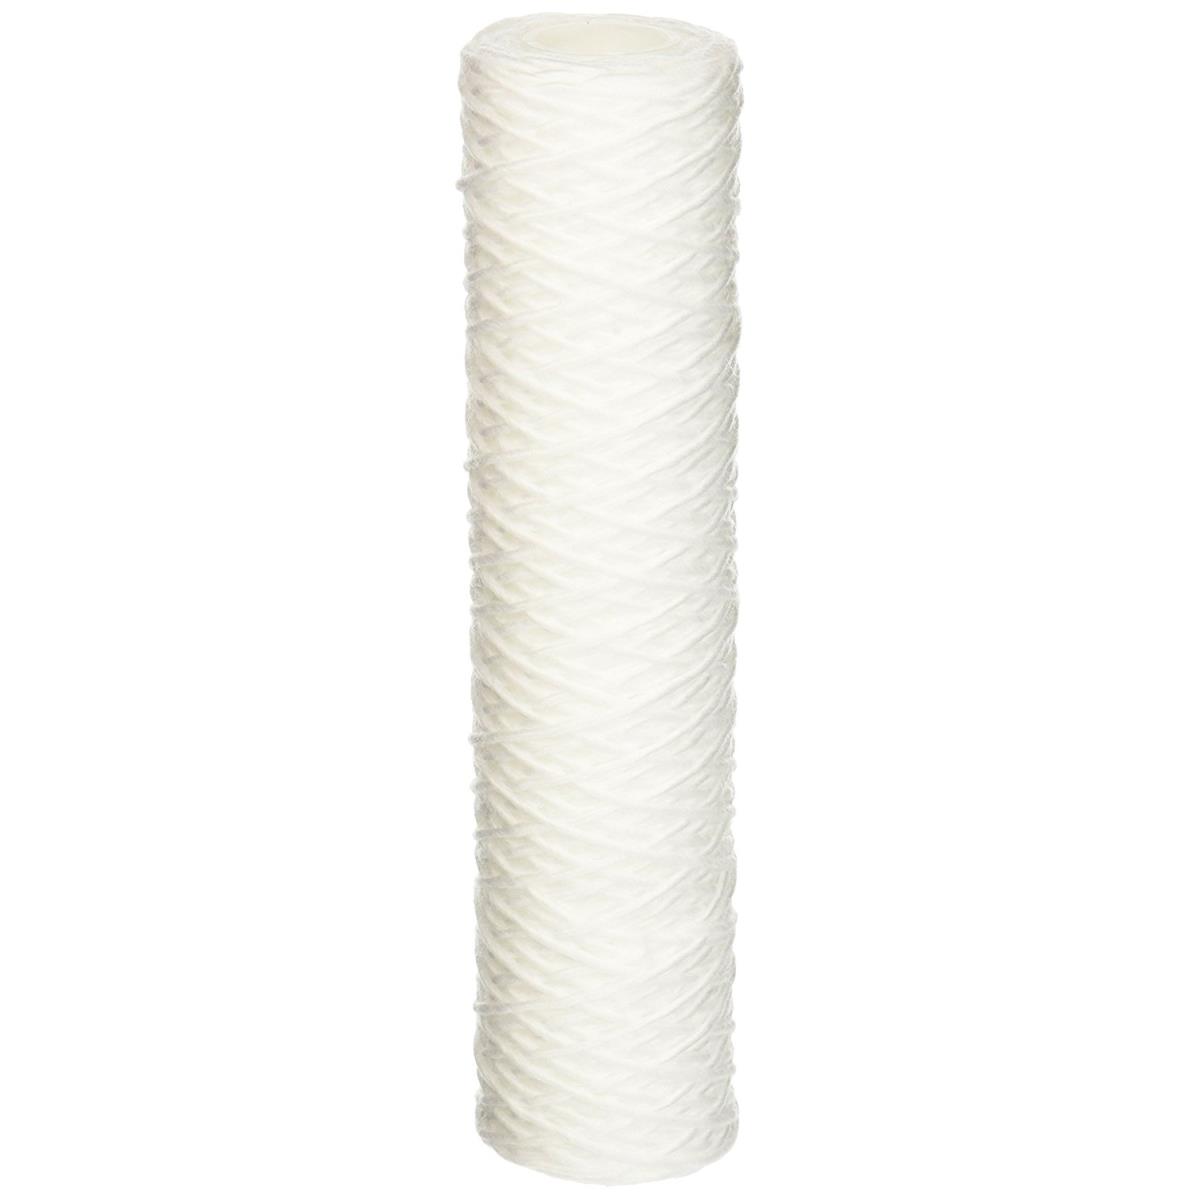 American-plumber-w50w Whole House Sediment Filter Cartridge, 50 Micron - Pack Of 2